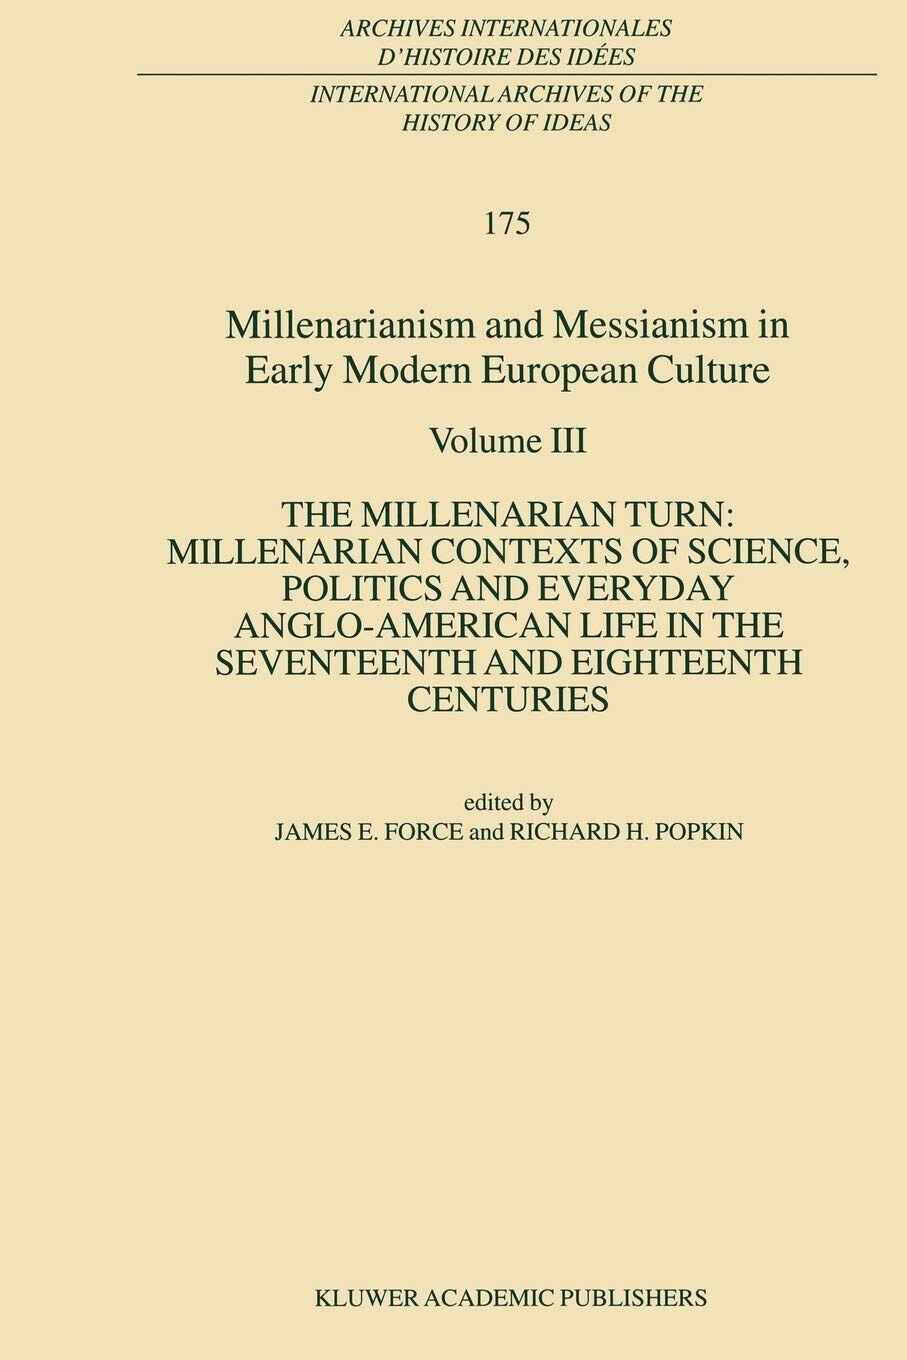 Millenarianism and Messianism in Early Modern European Culture. Volume III -2010 libro usato